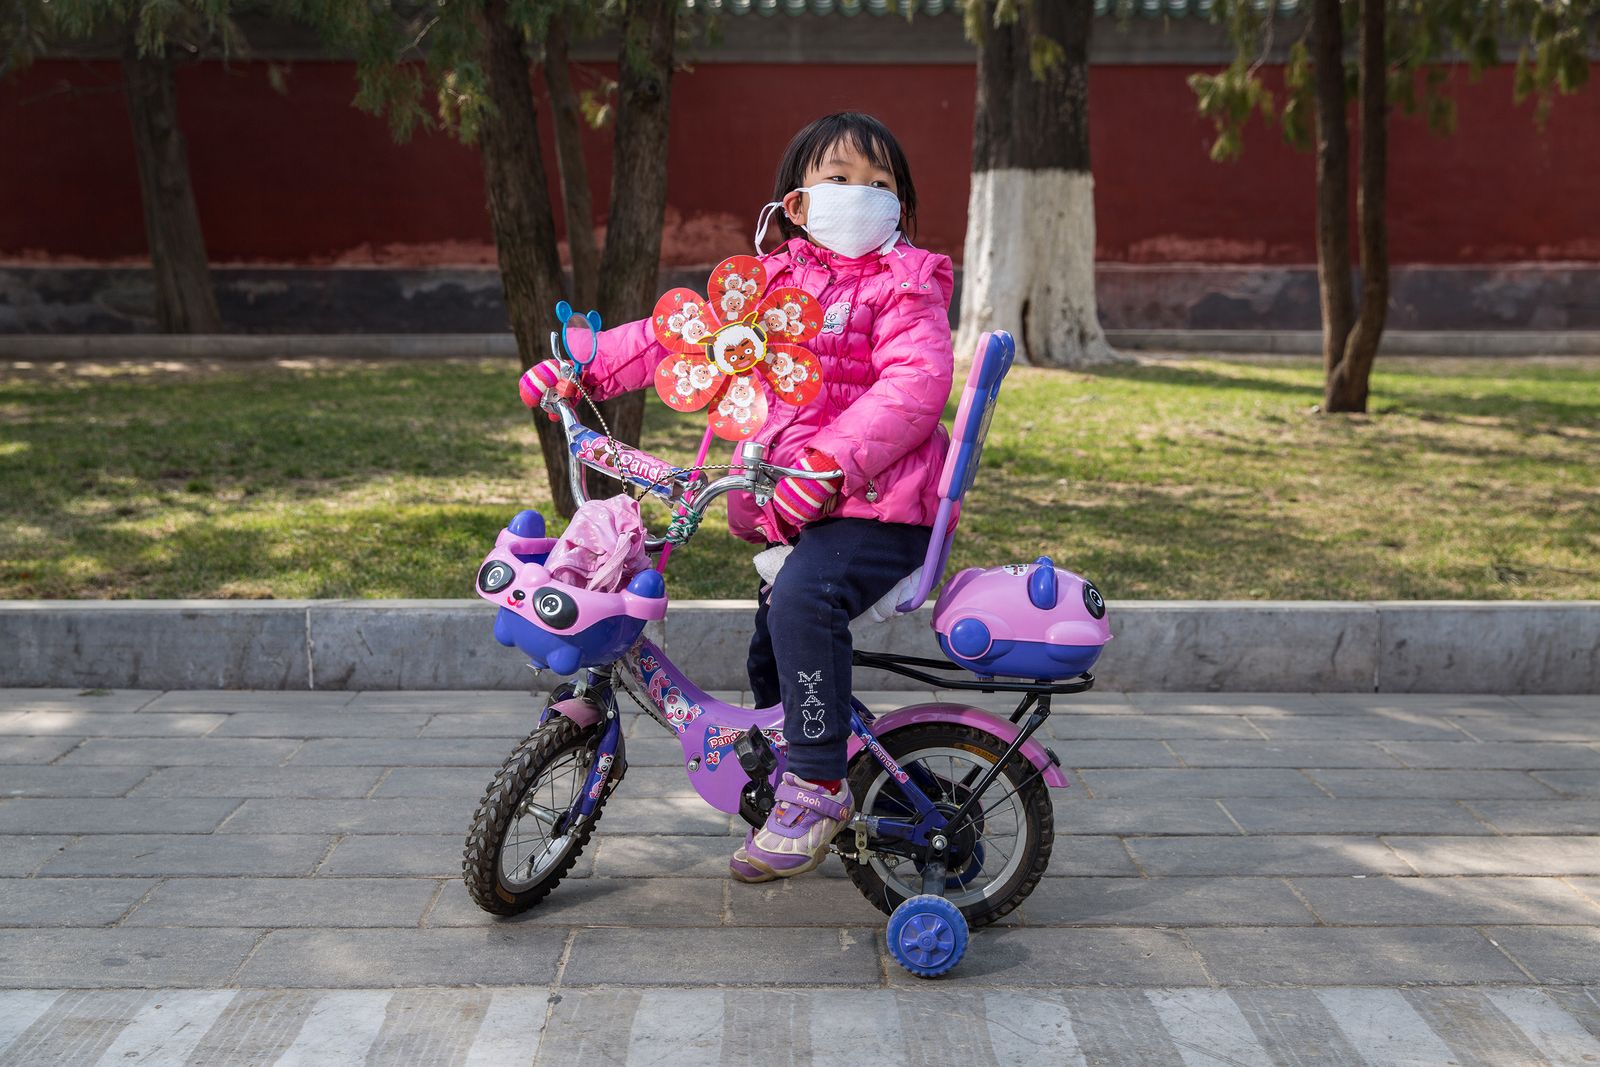 © Sean Gallagher - A young girl pauses for a moment while riding her bike through Beijing's Ditan Park.